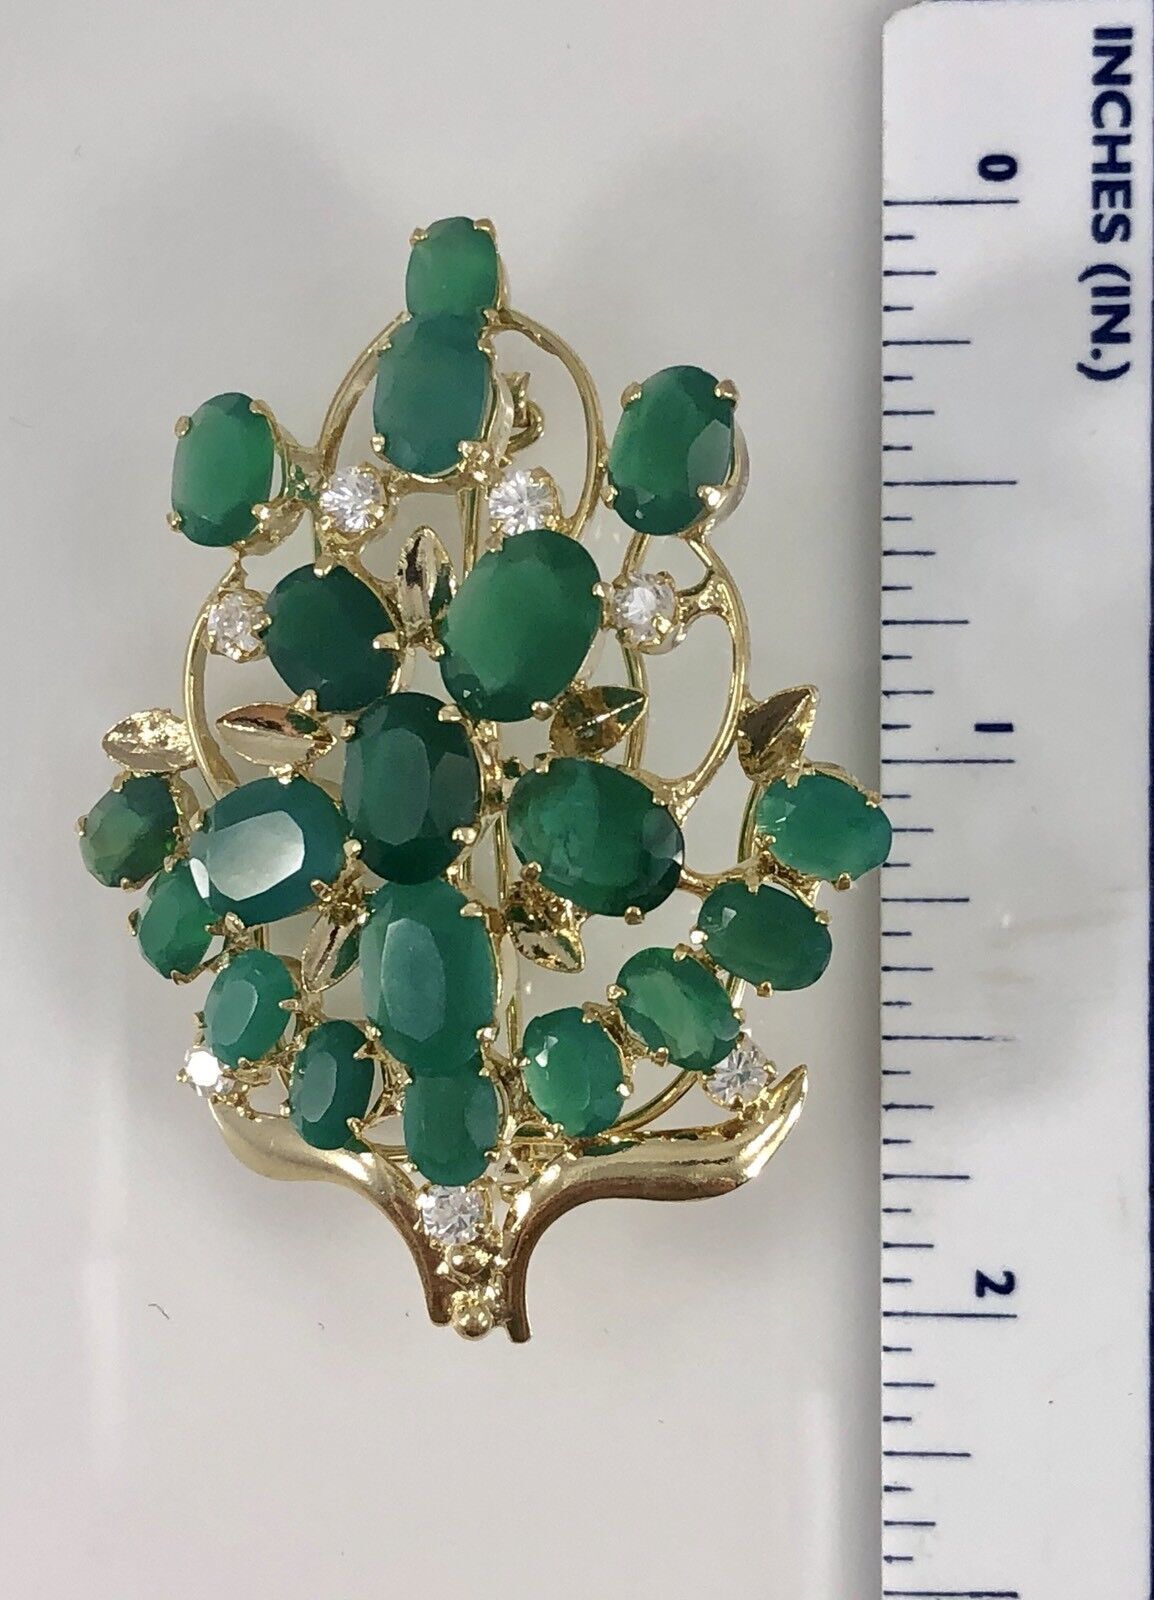 Genuine Green Chalcedony Cluster Pin or Pendant 22kt HGE, New, Size 2"